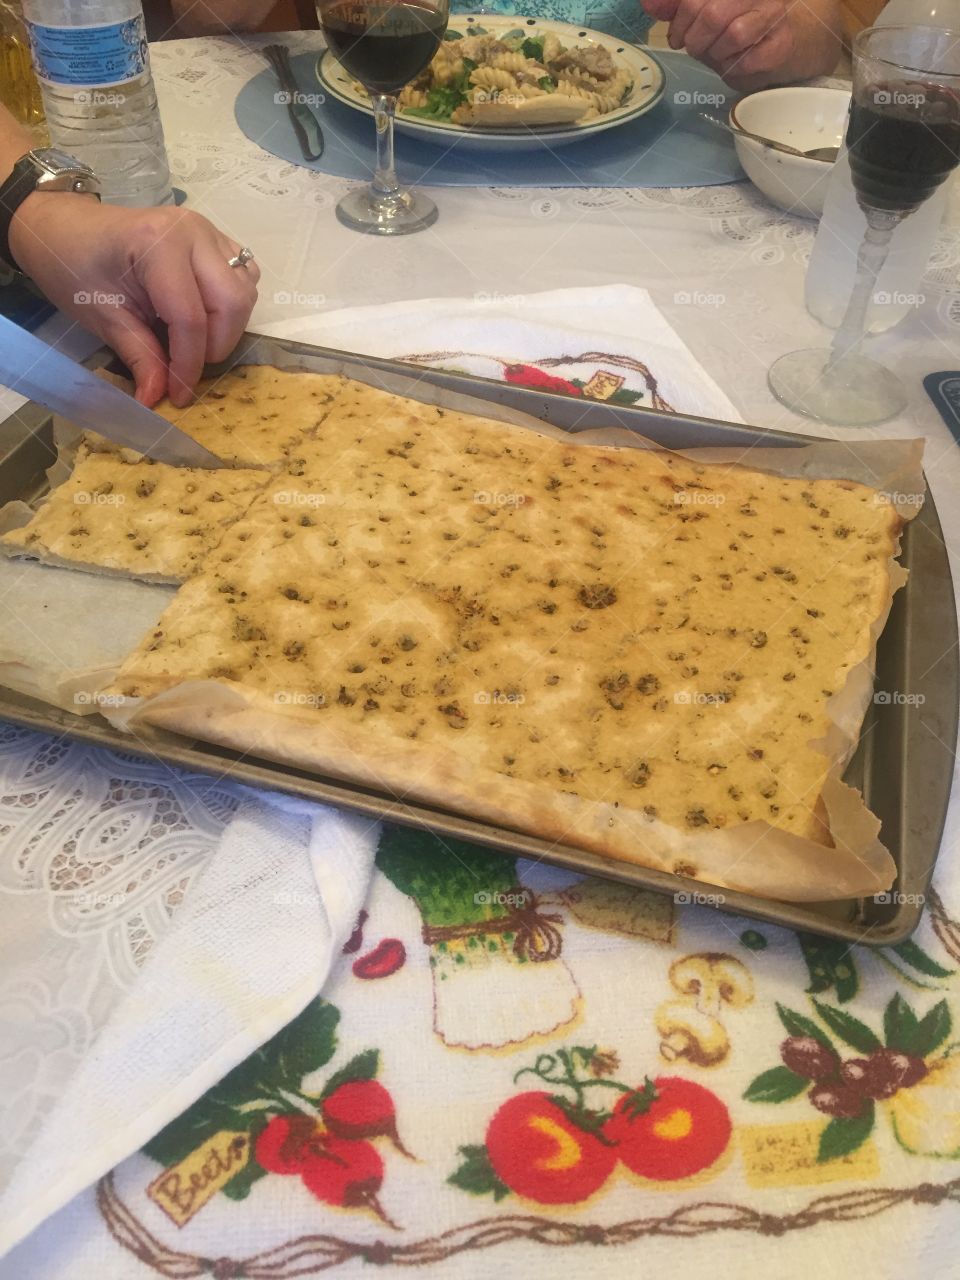 Cut me a piece of that homemade delicious seasoned gluten free, dairy free flatbread